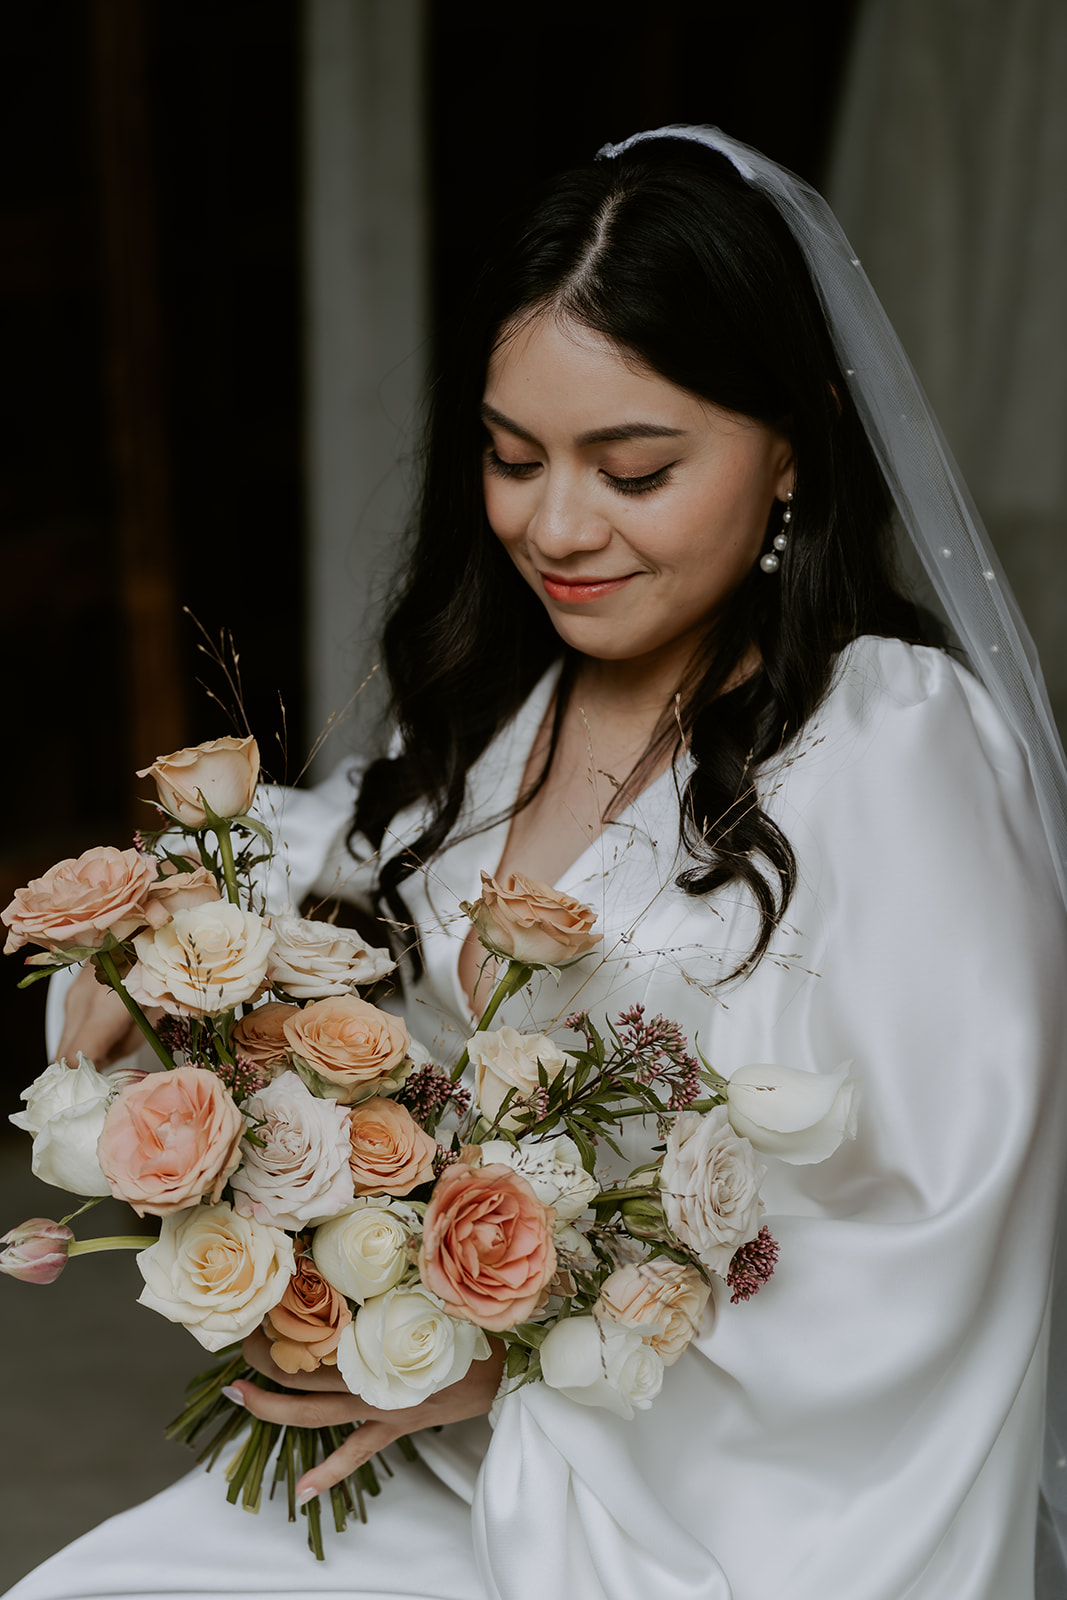 A bride in a white dress and veil smiling gently as she holds a bouquet of soft pink and cream roses.